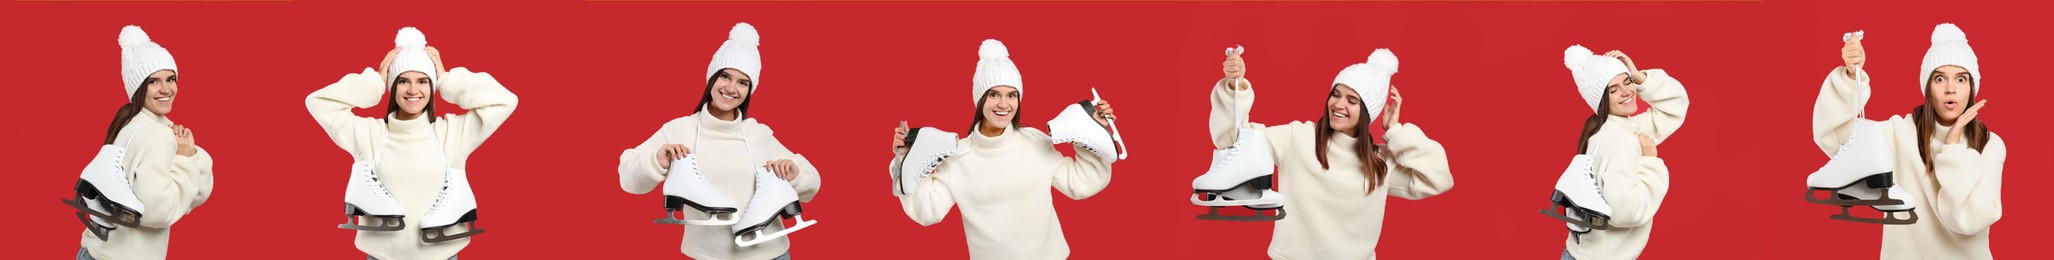 Image of Collage with photos of woman with ice skates on red background, banner design